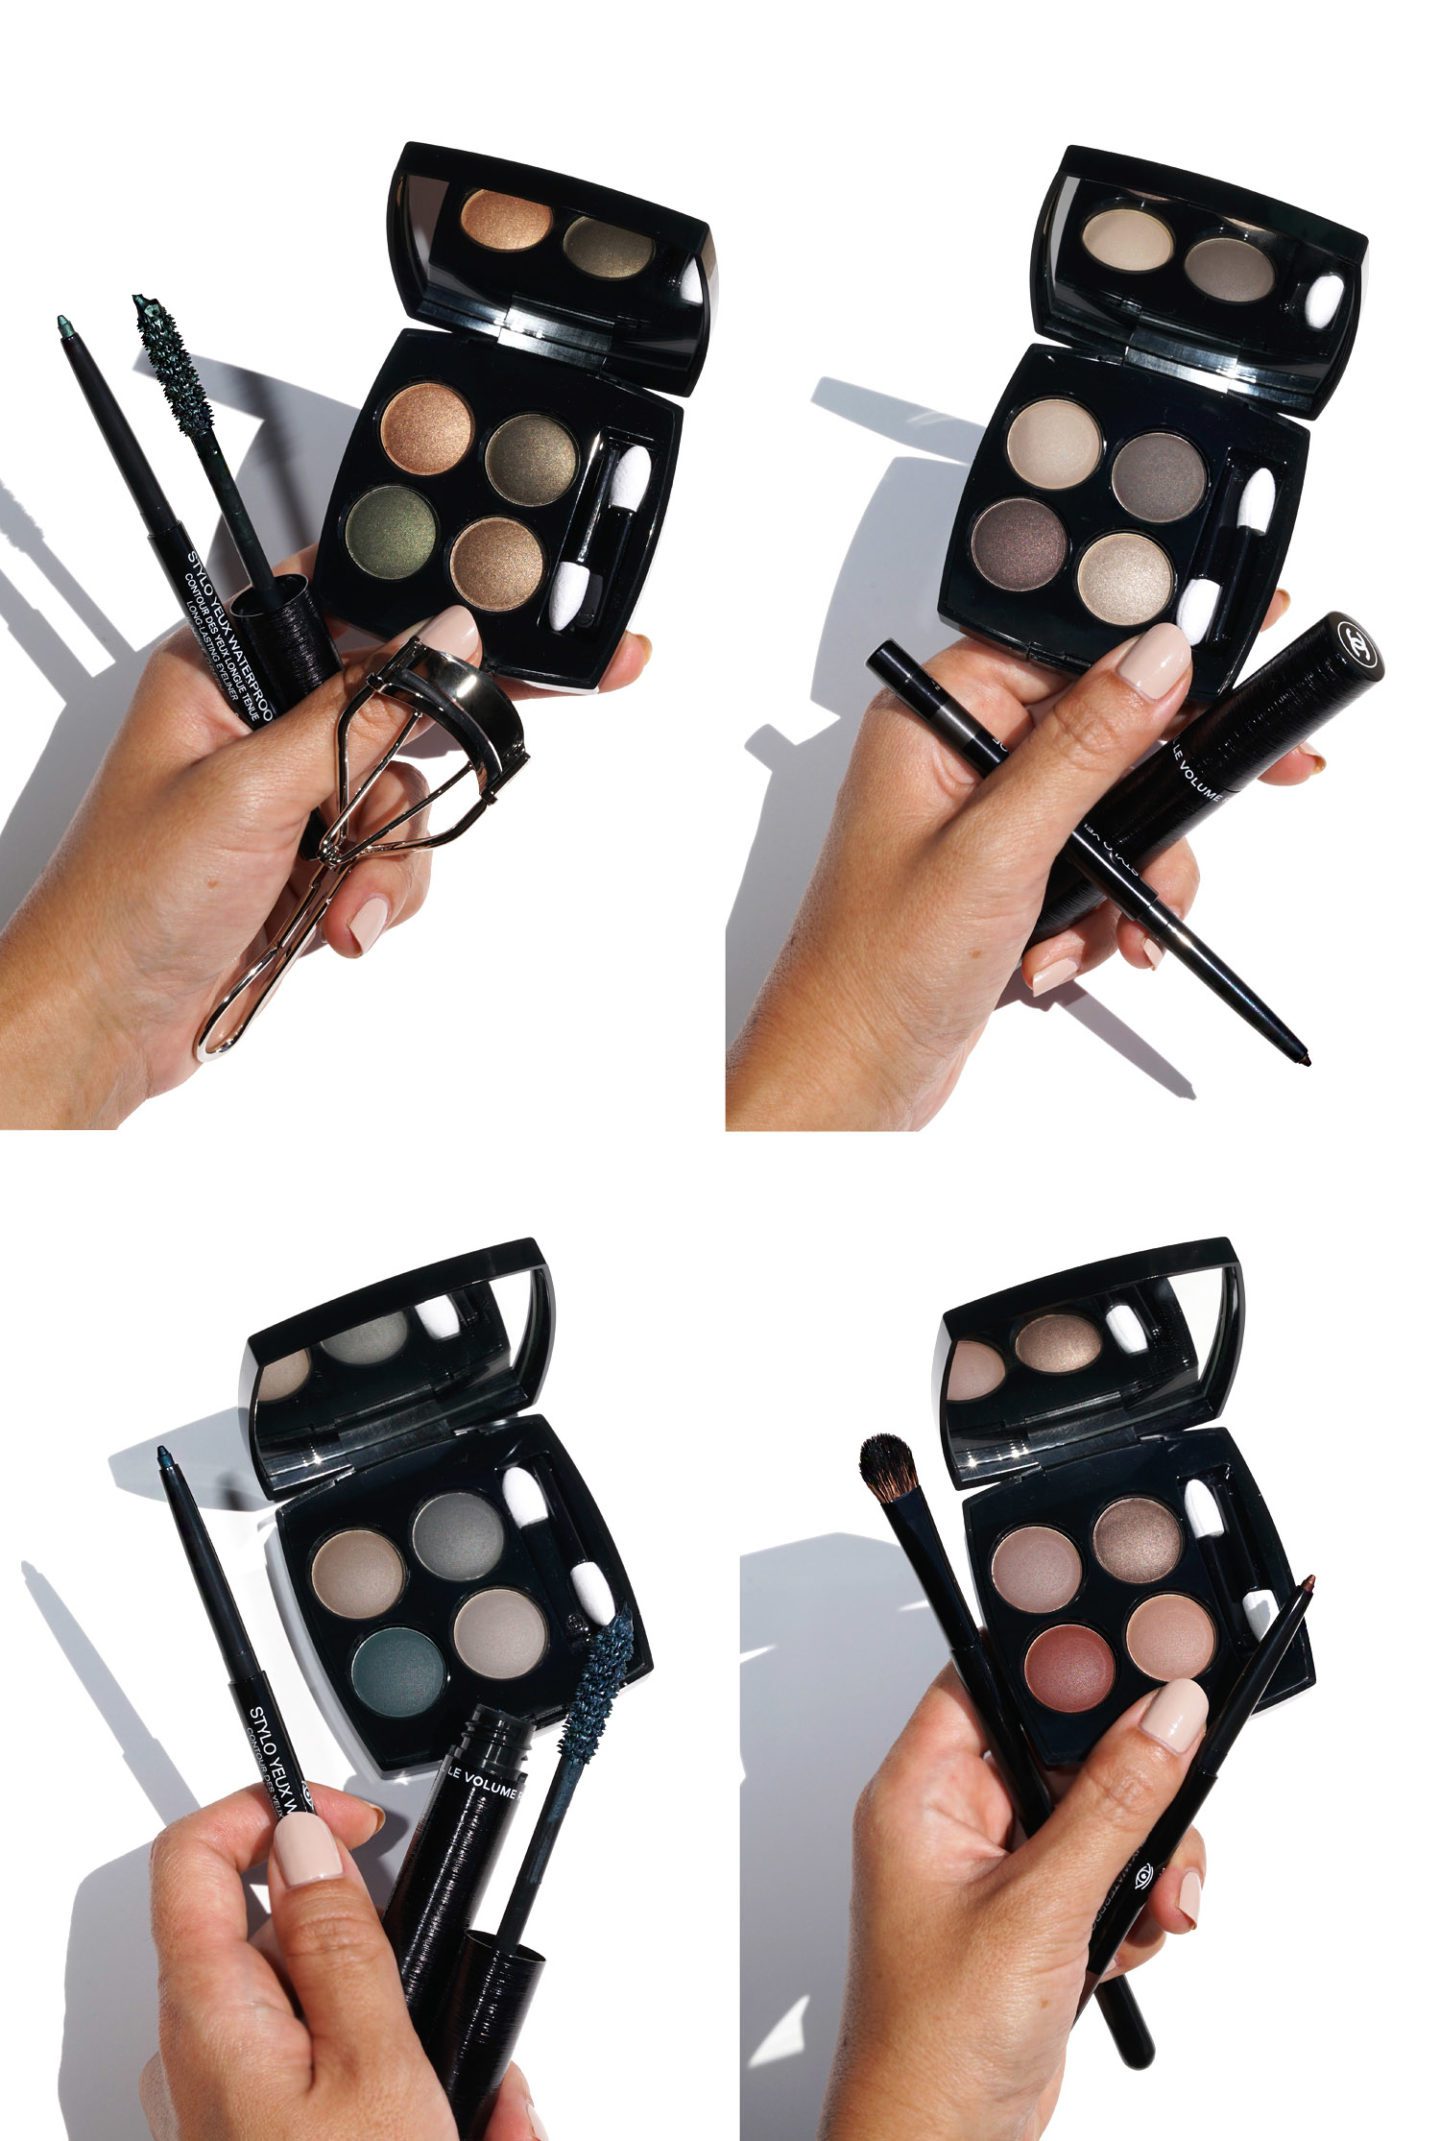 Chanel Beauty The New Eye Collection Review and Swatches | The Beauty Look Book